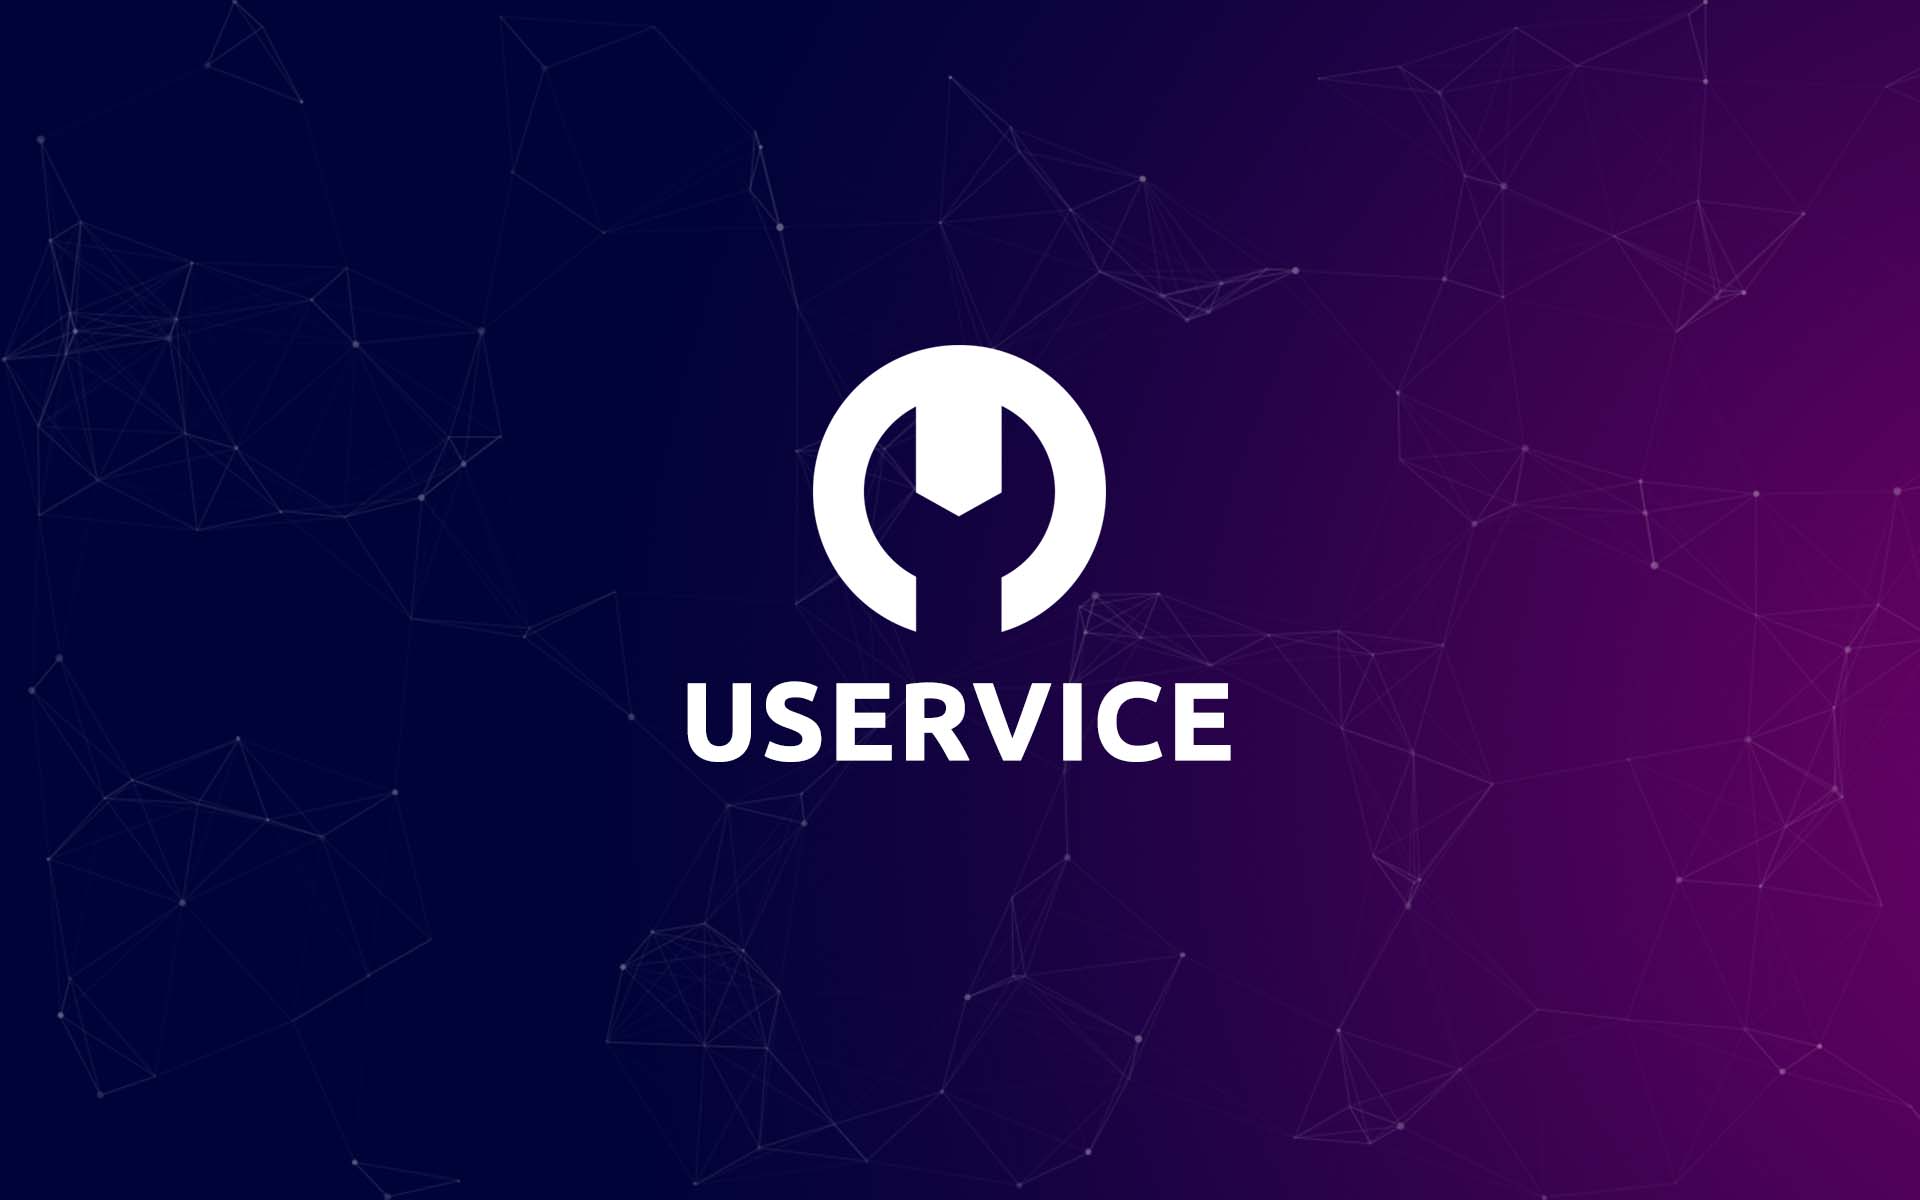 USERVICE - a New Economic Model for the Auto Industry Using Blockchain Technology